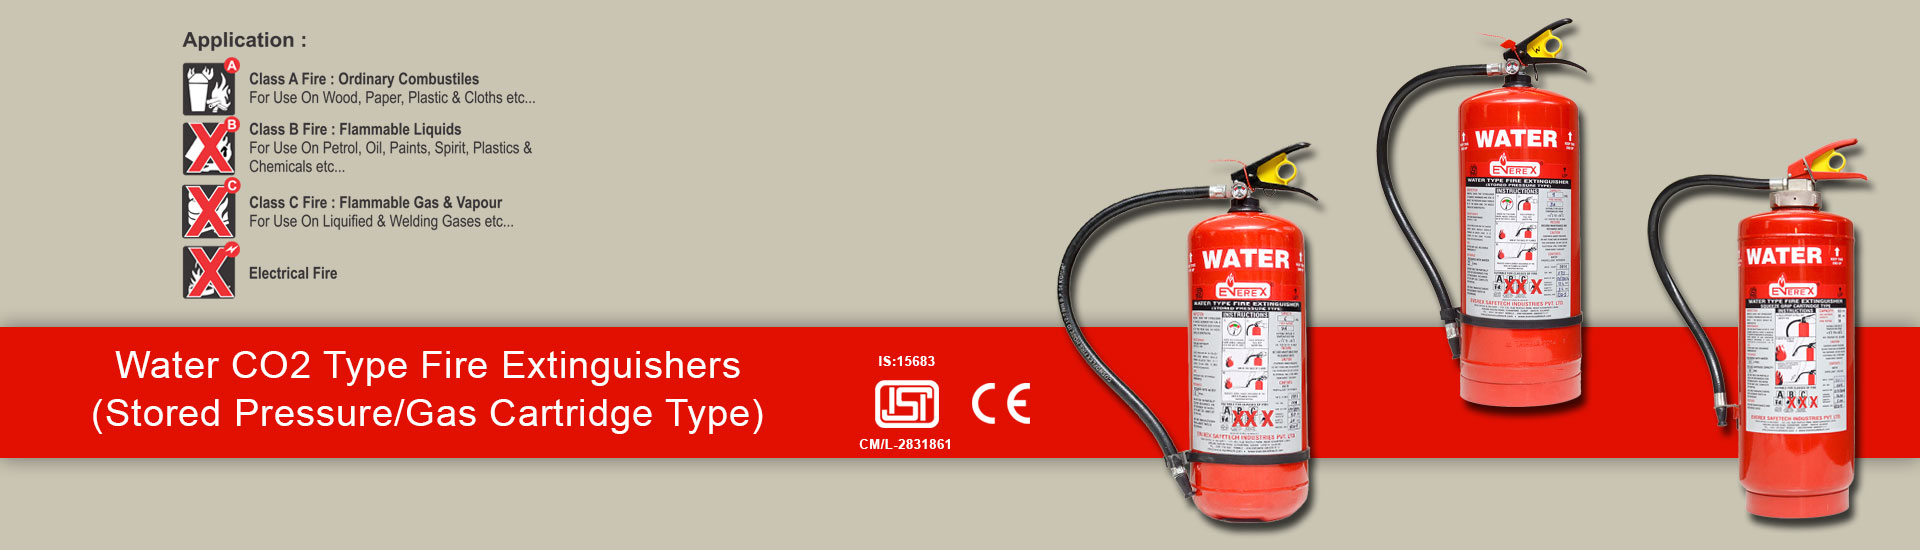 Water co2 type fire extinguishers